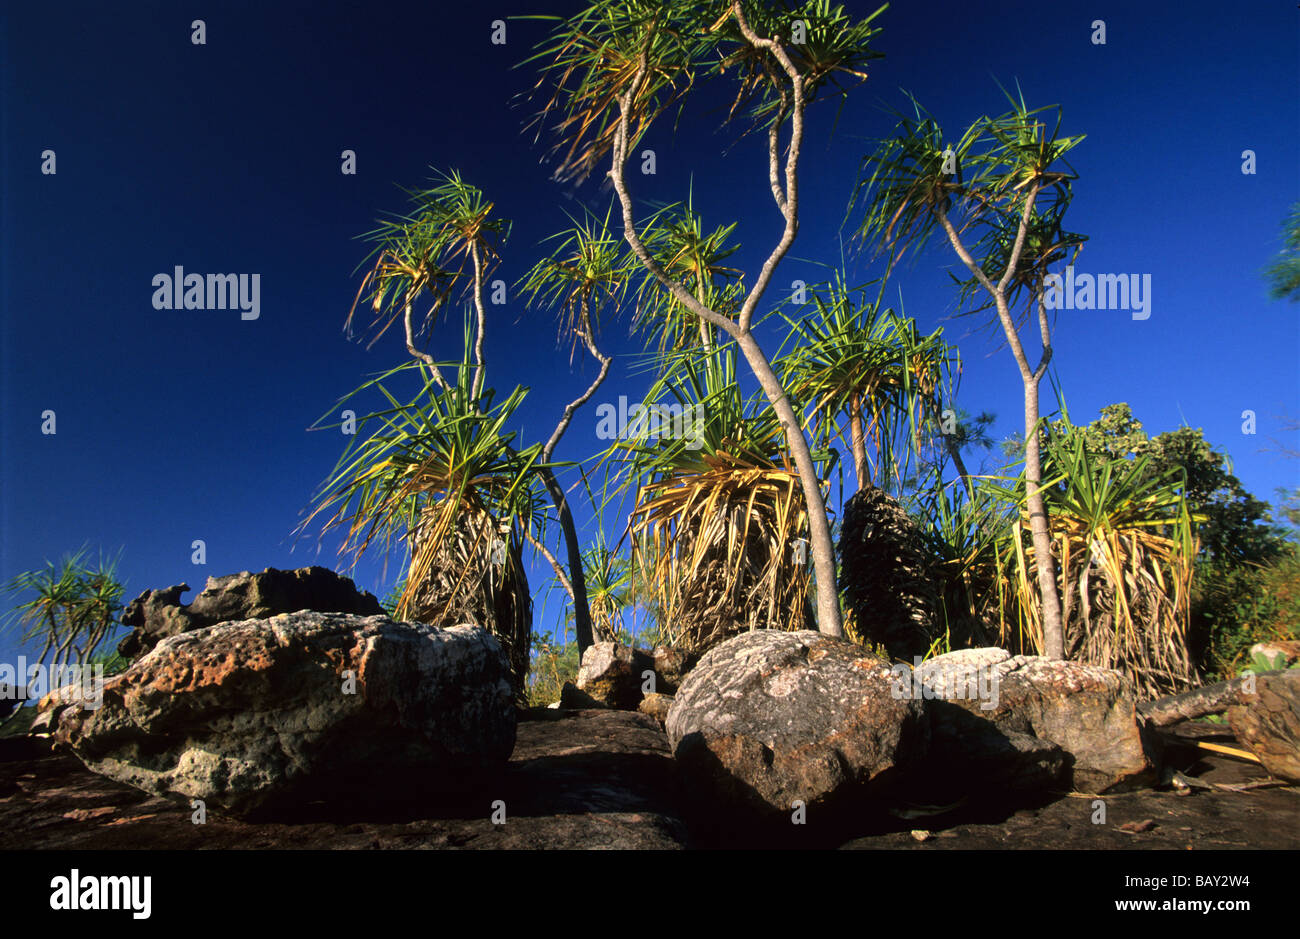 Pandani, Palm trees on Wigram island, one of the islands in the archipelago of the English Compan's Islands, Australia Stock Photo